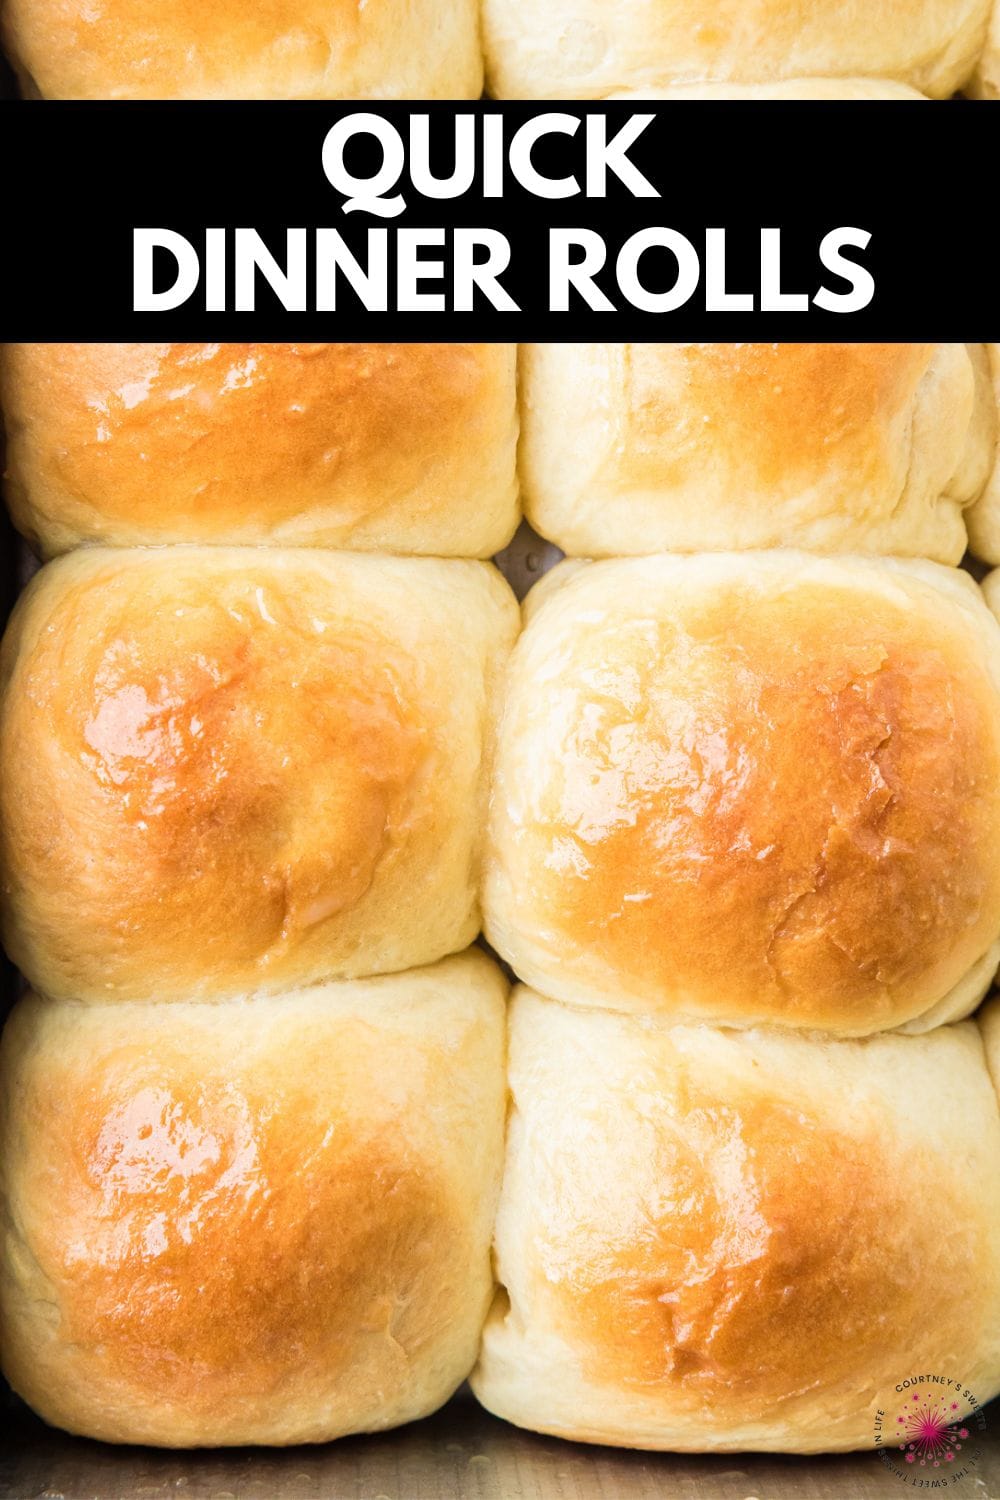 quick dinner rolls with text on image for pinterest.